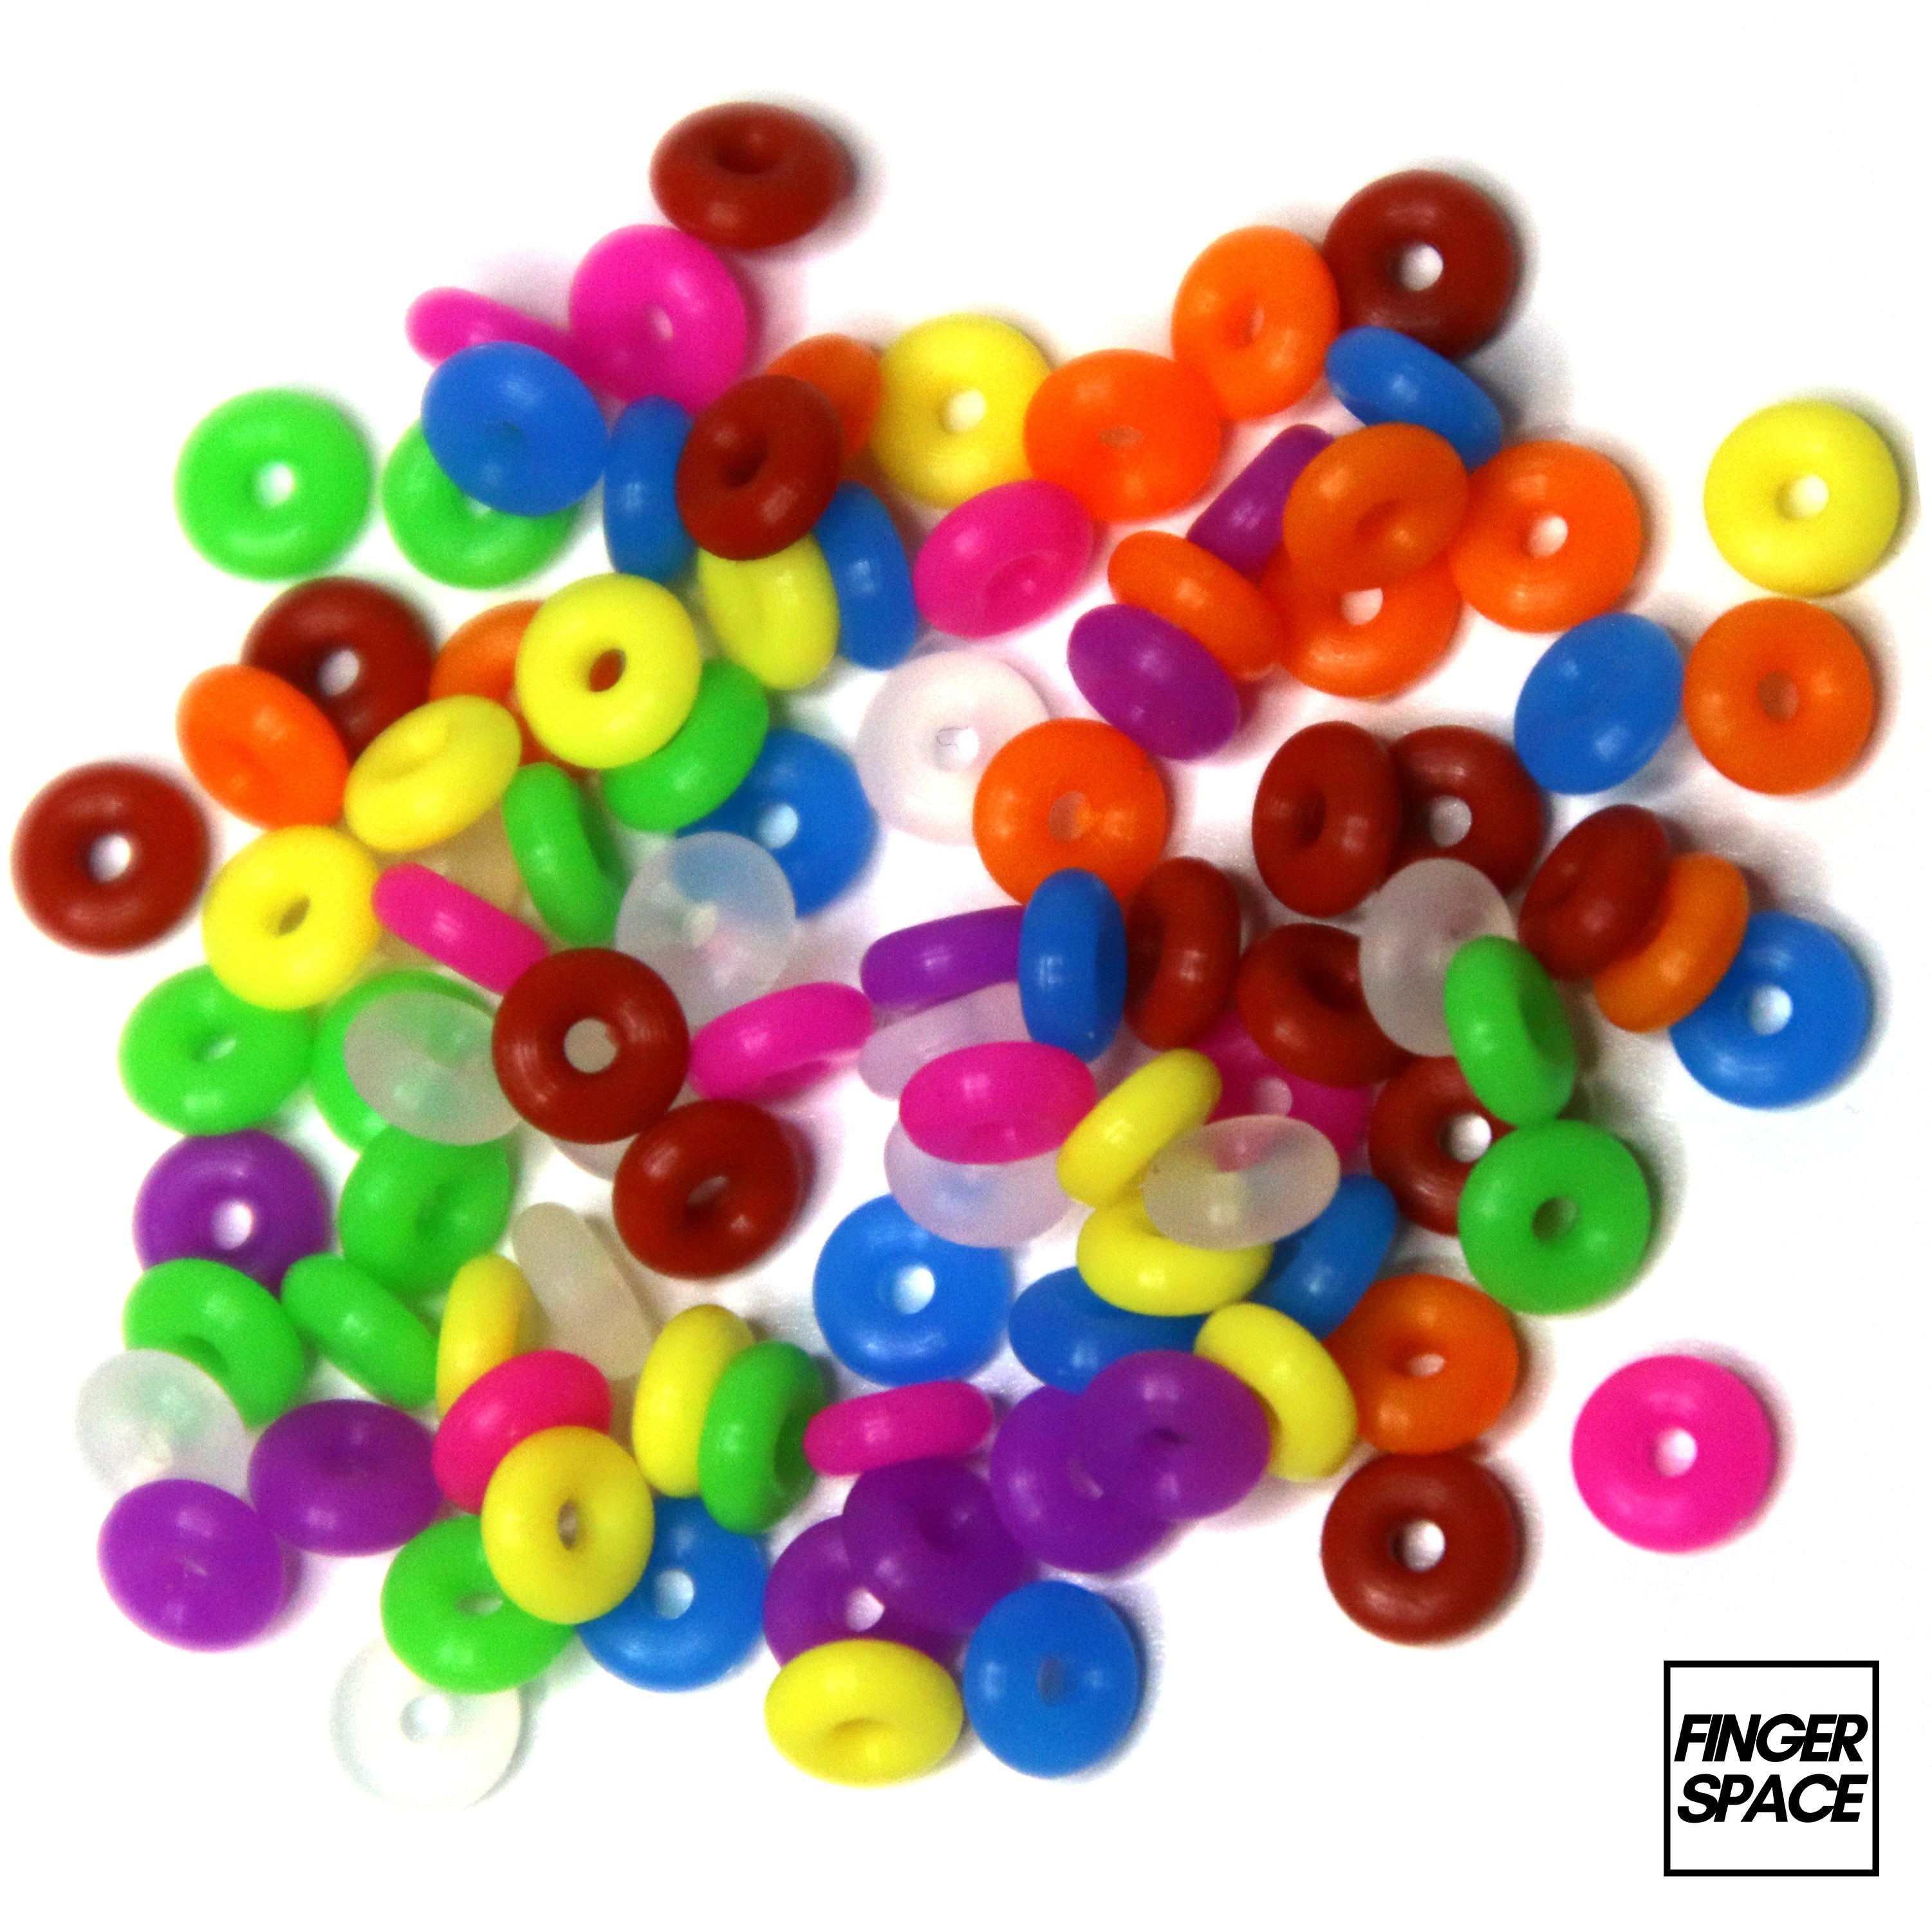 100-Pack of Mixed Color Silicone O-Ring Tuning